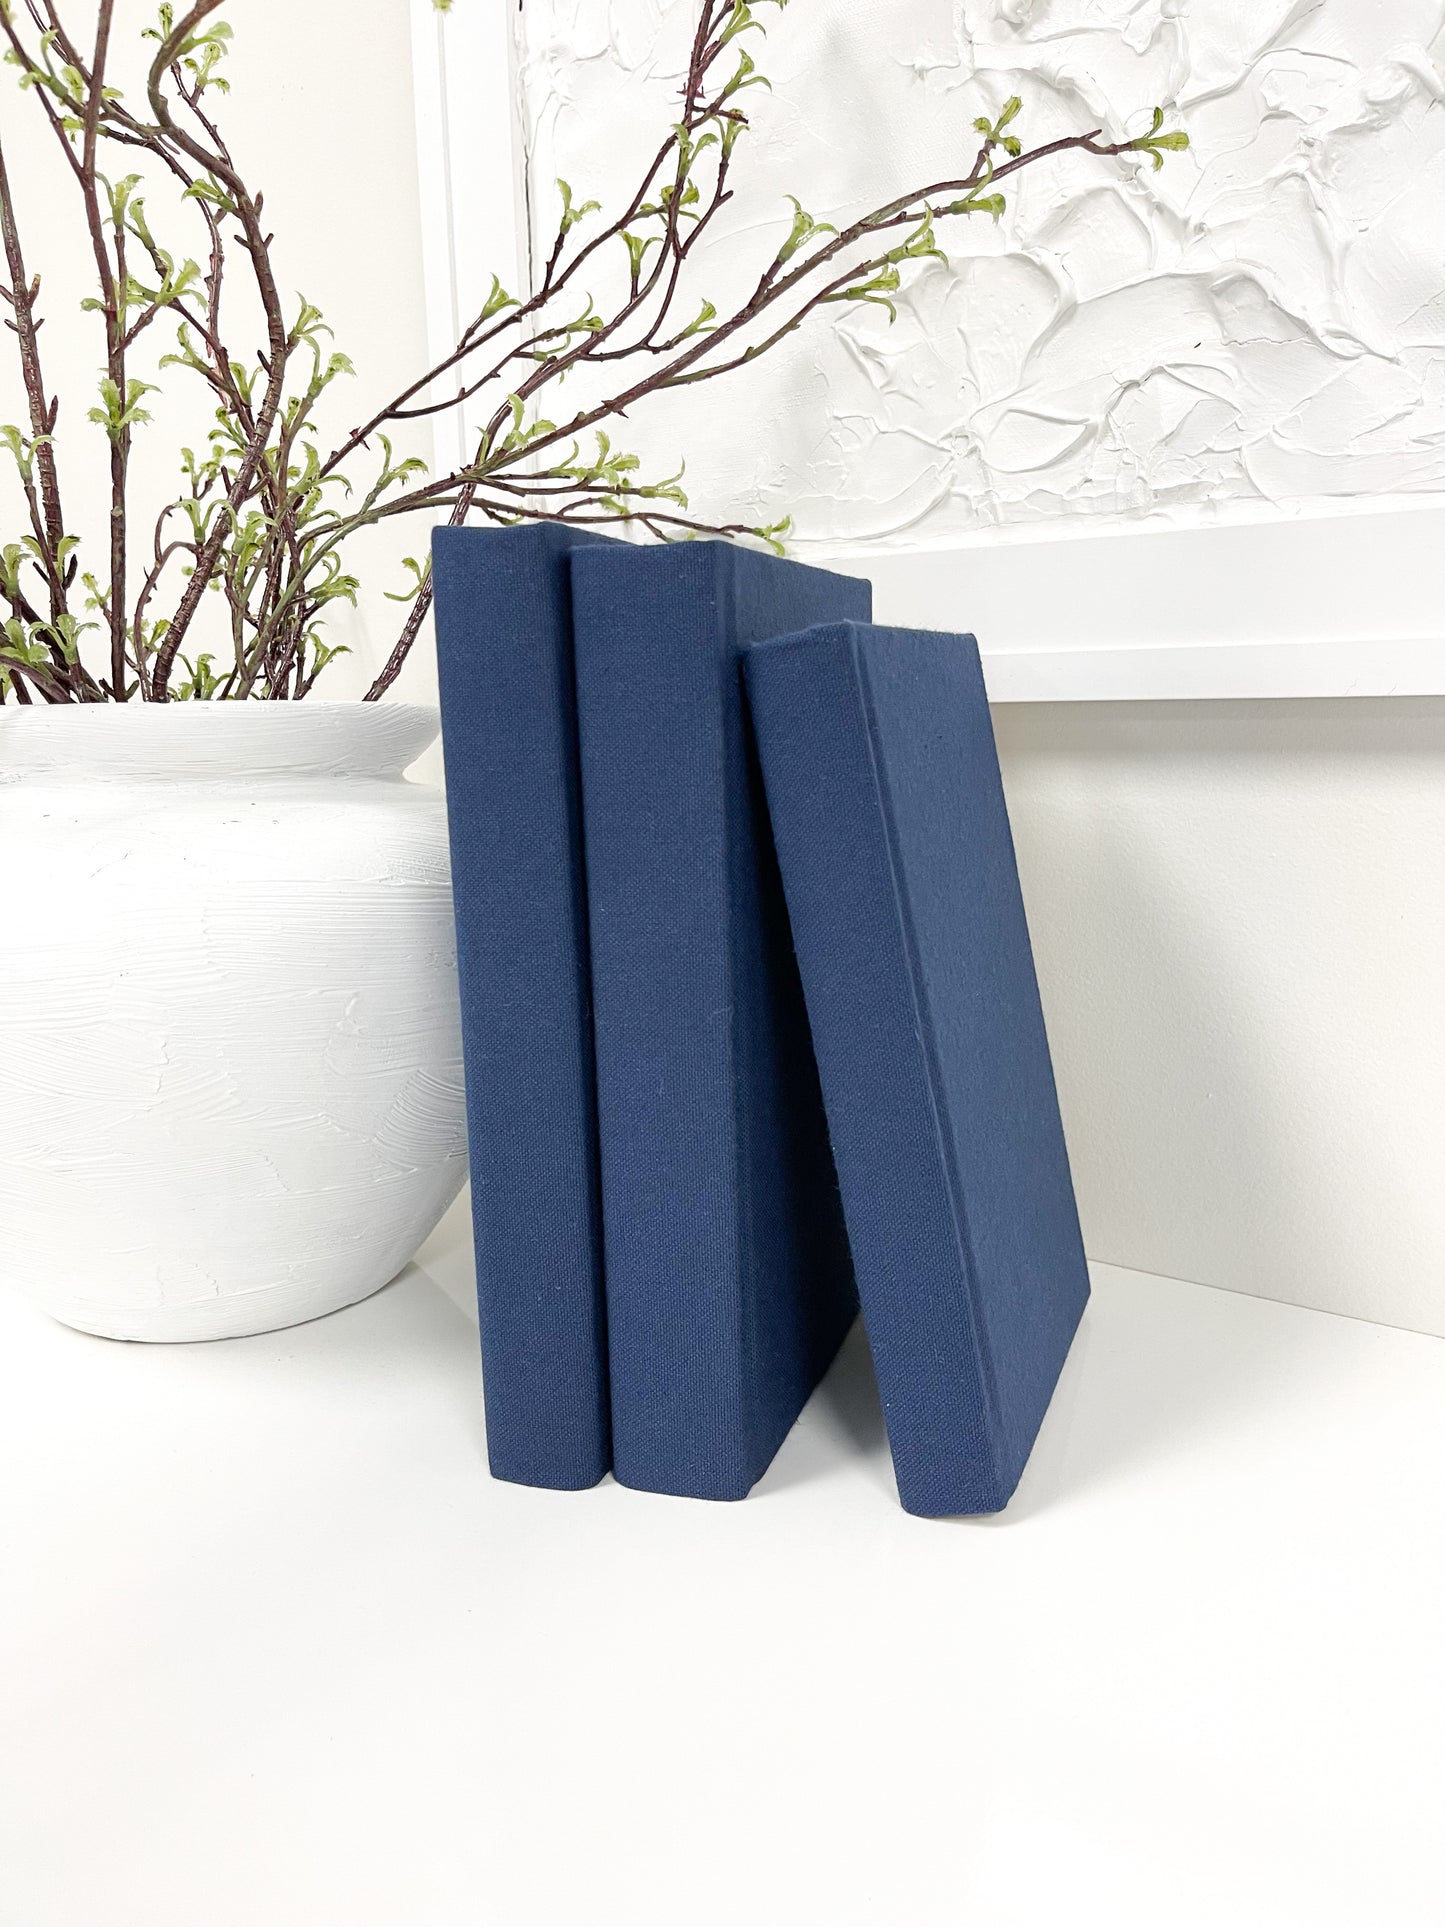 Solid Navy Blue Fabric Covered Book